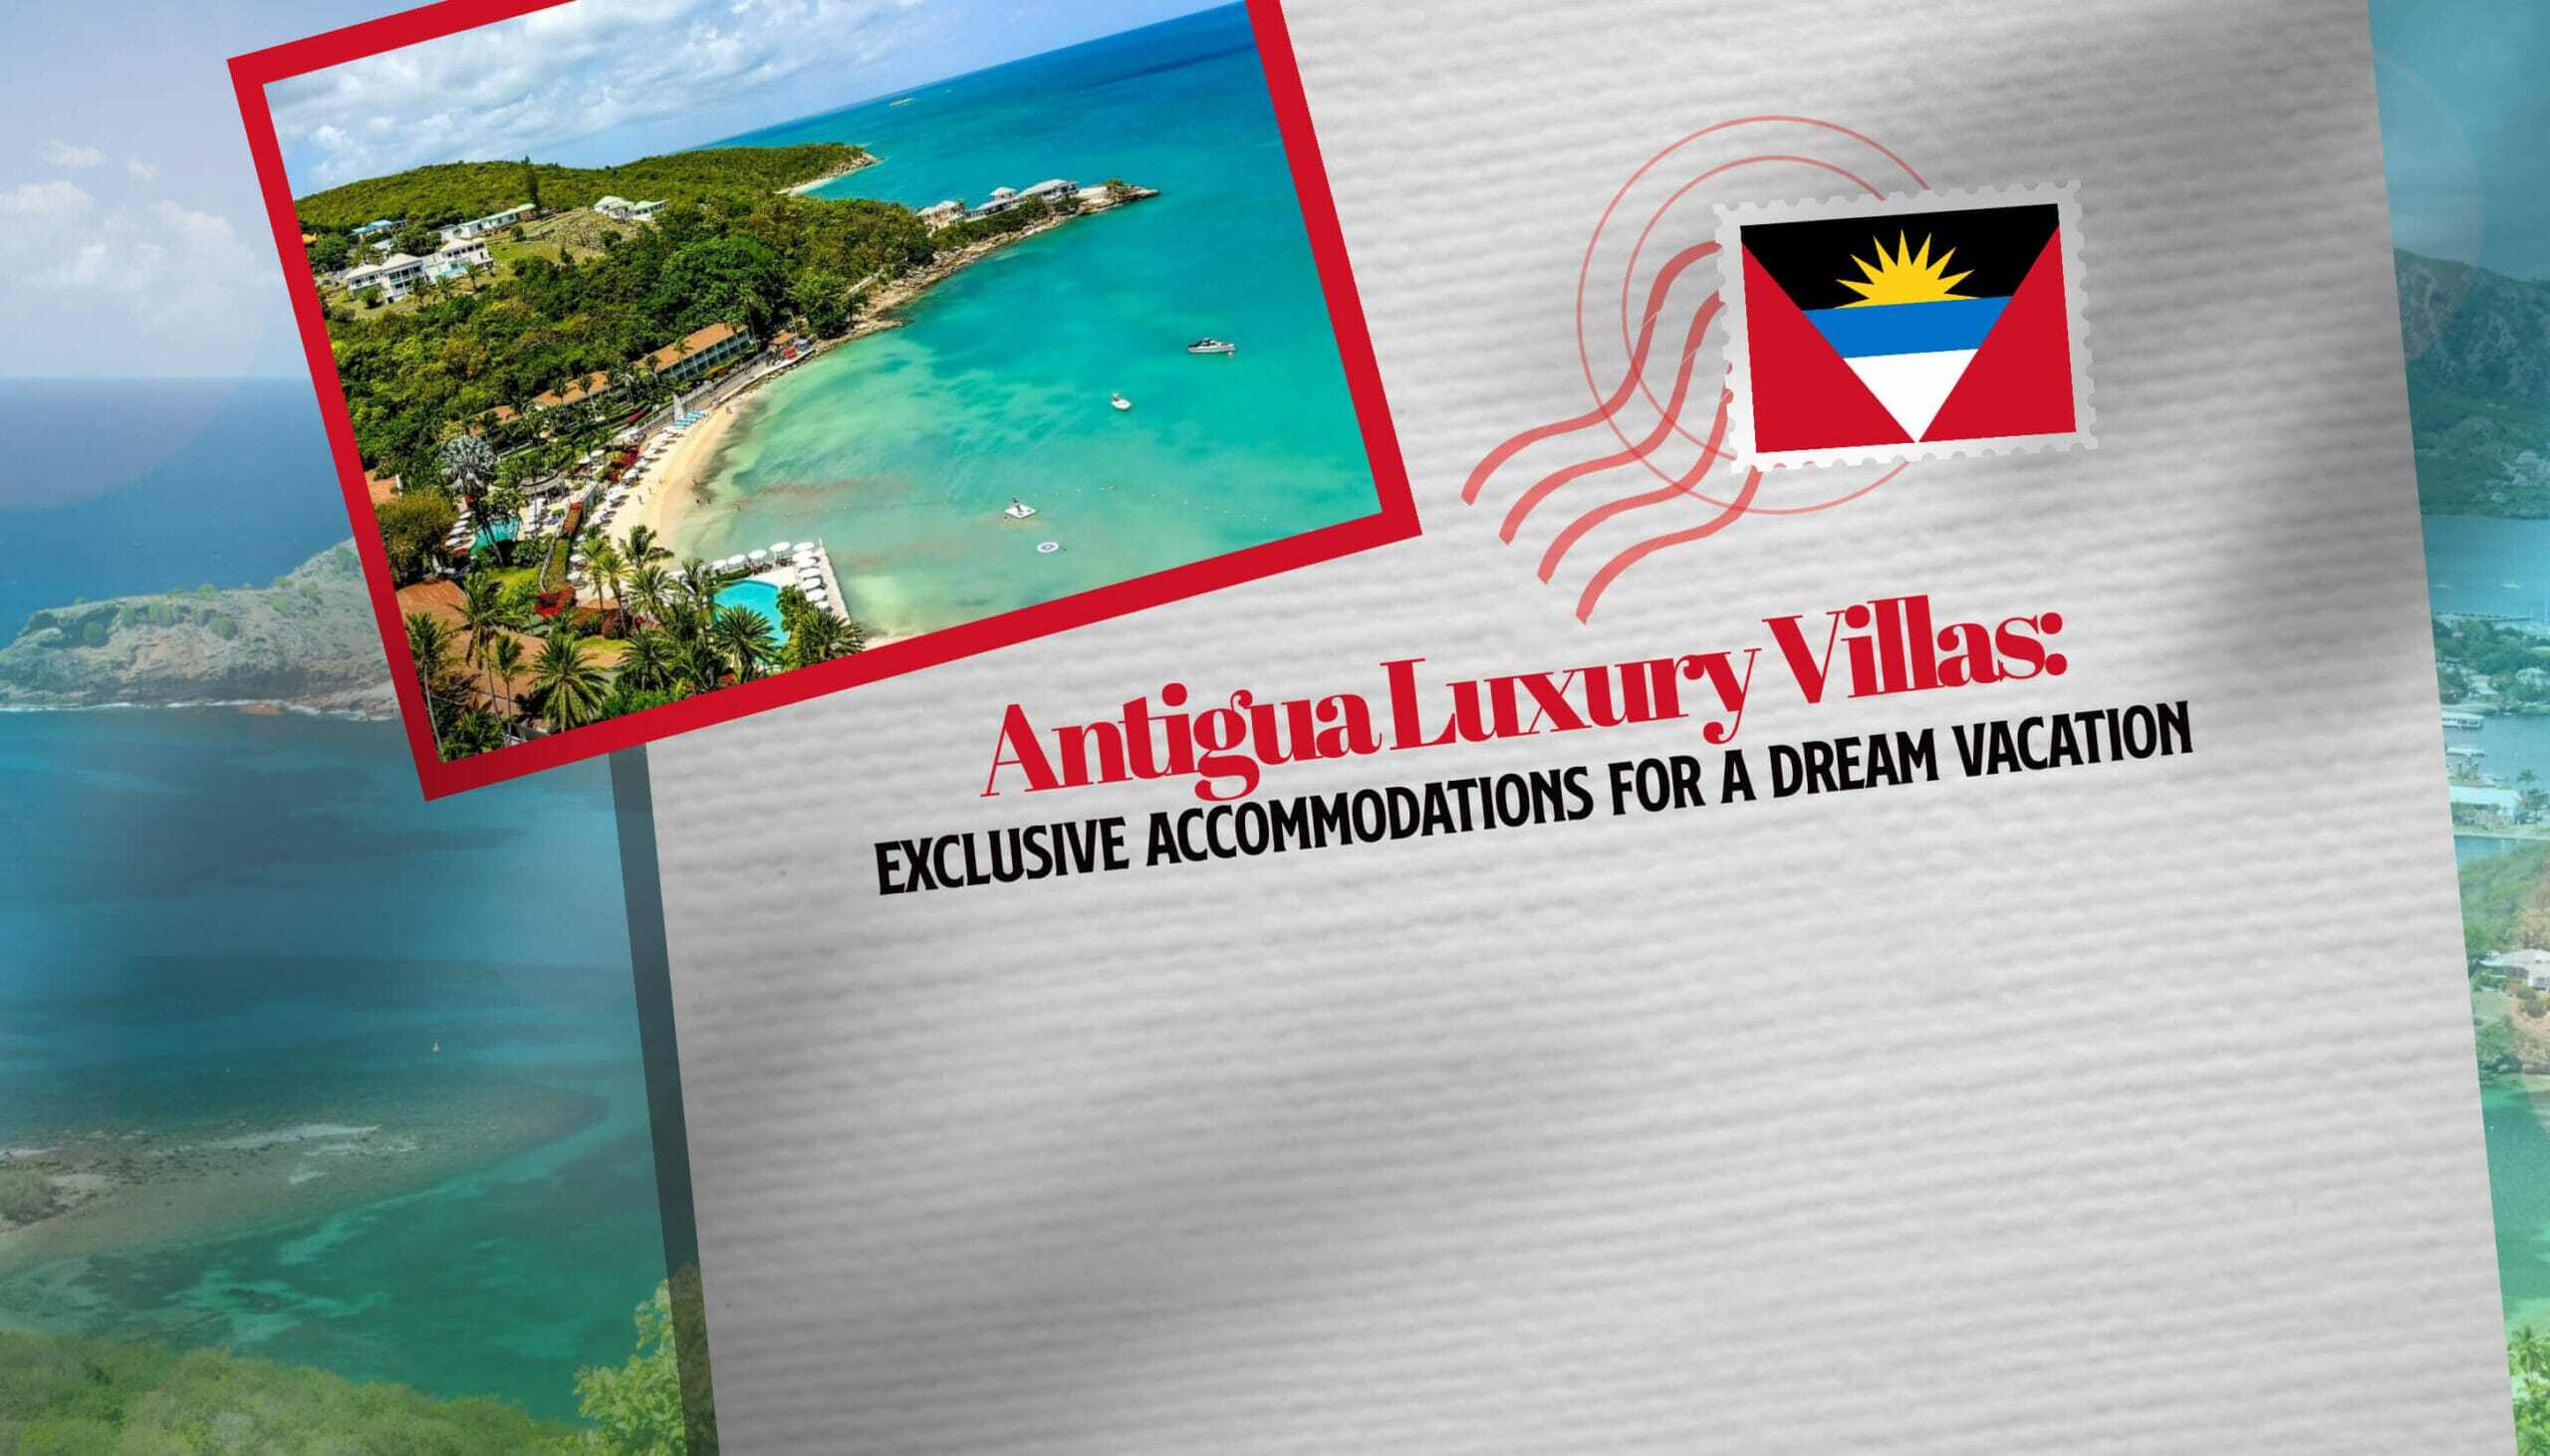 Antigua Luxury Villas Exclusive Accommodations for a Dream Vacation